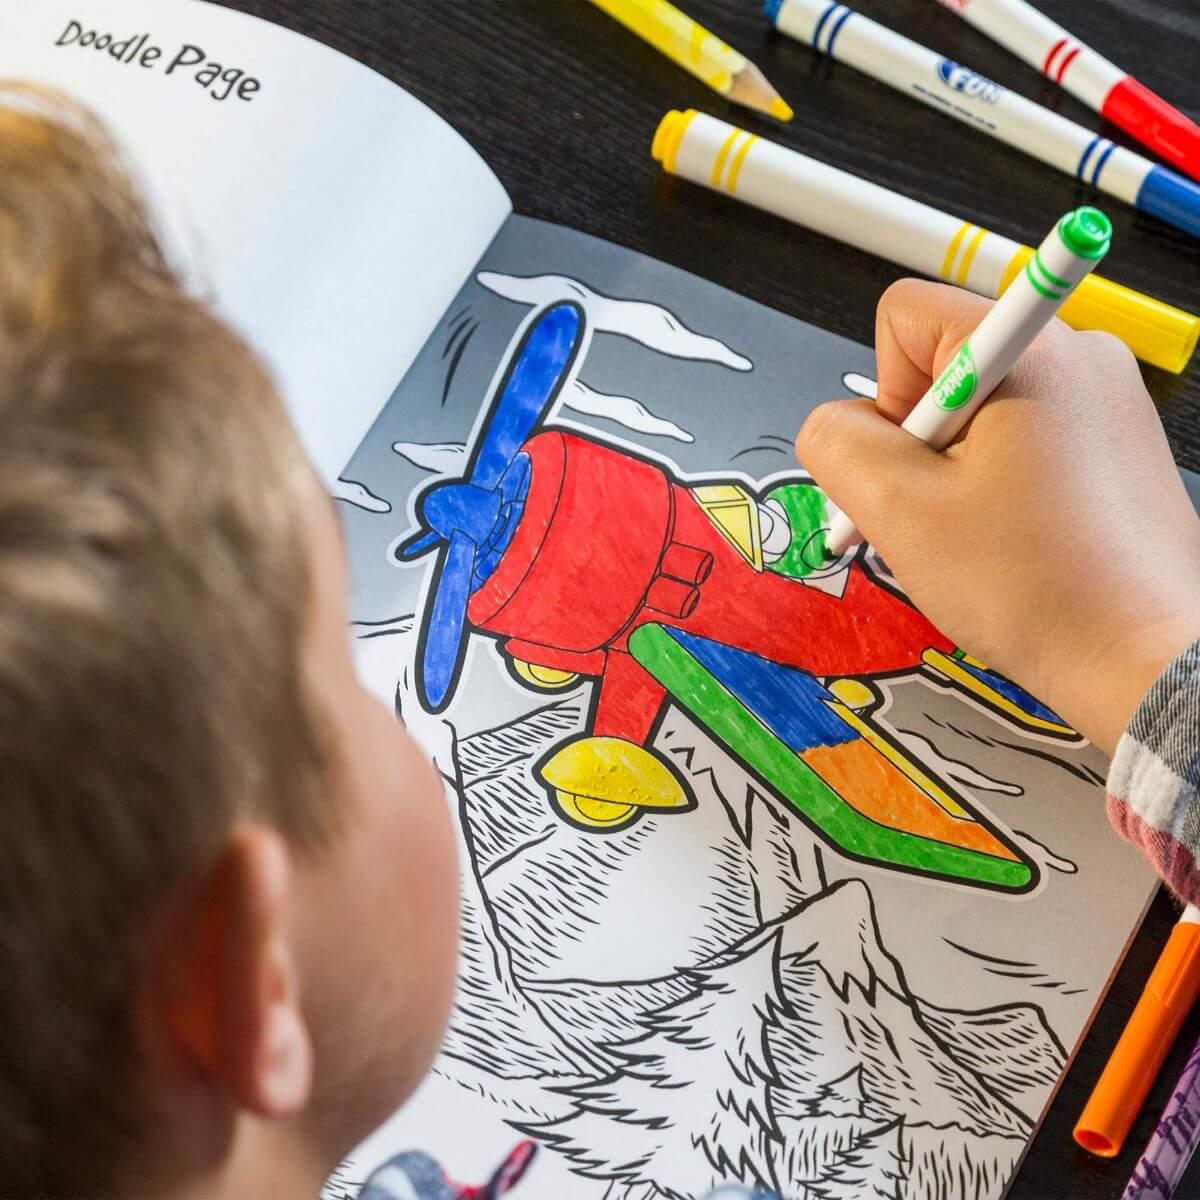 Looking over the shoulder of a boy colouring in an plane.